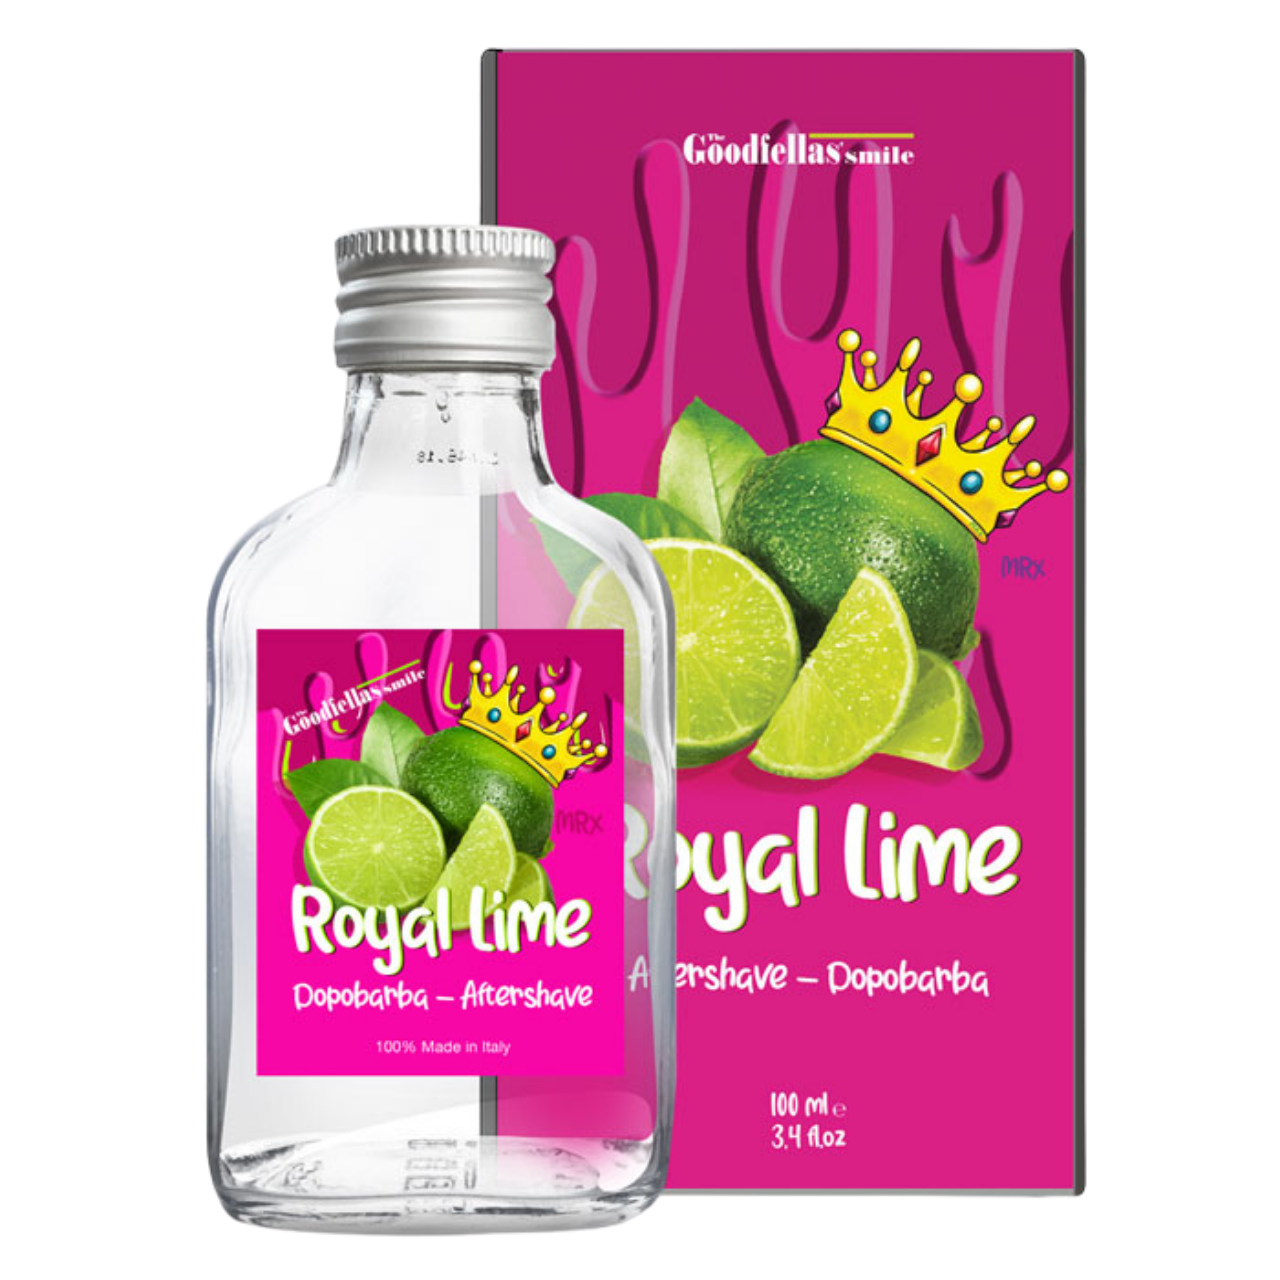 The Goodfellas Smile Royal Lime Aftershave | Agent shave